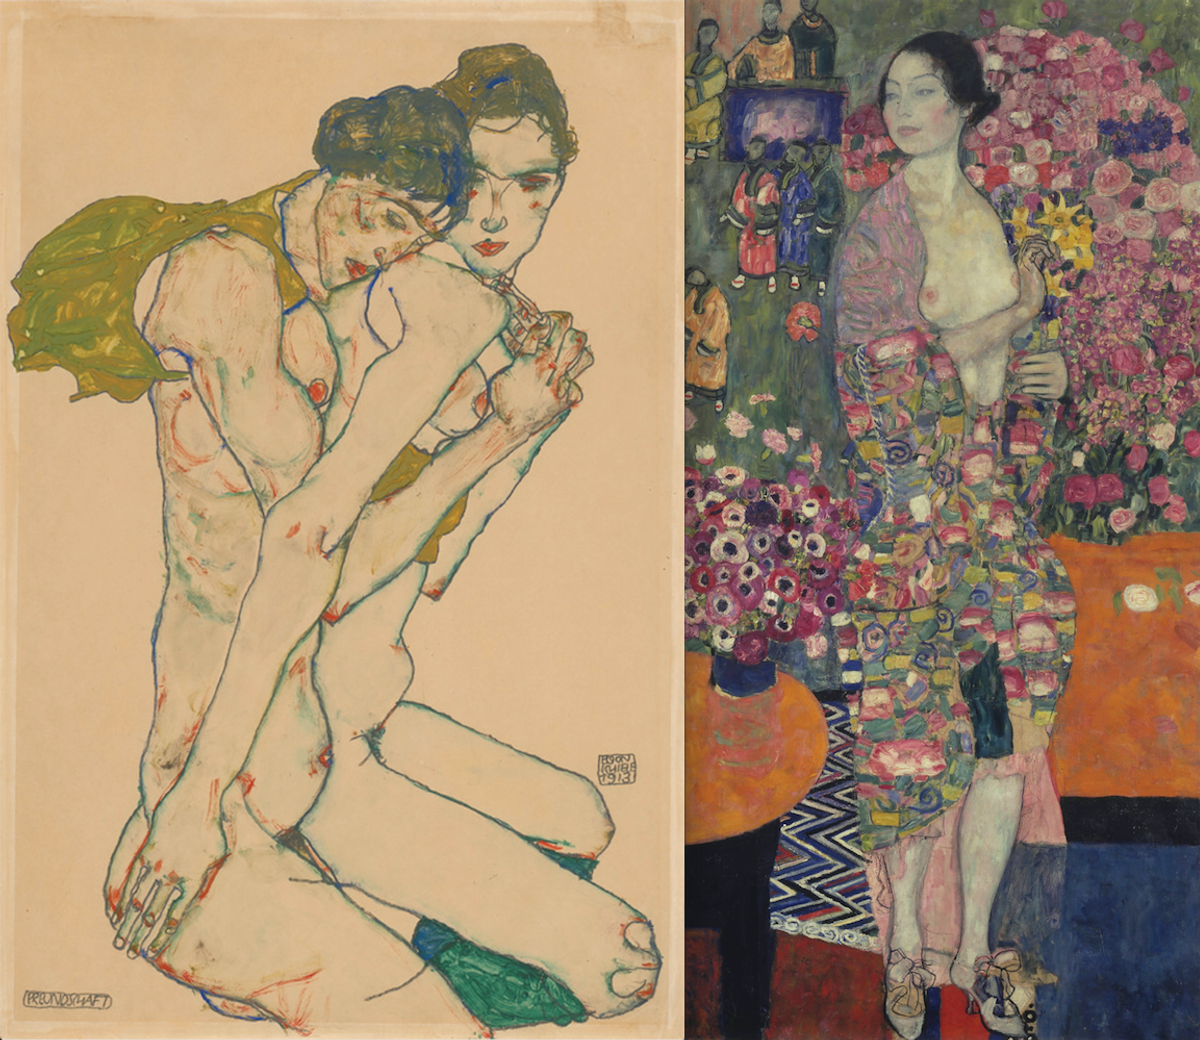 The Neue Galerie’s show—which includes Egon Schiele’s Friendship (1913) and Gustav Klimt’s The Dancer (1916-17)—also features a number of more explicit works Courtesy of Neue Galerie New York